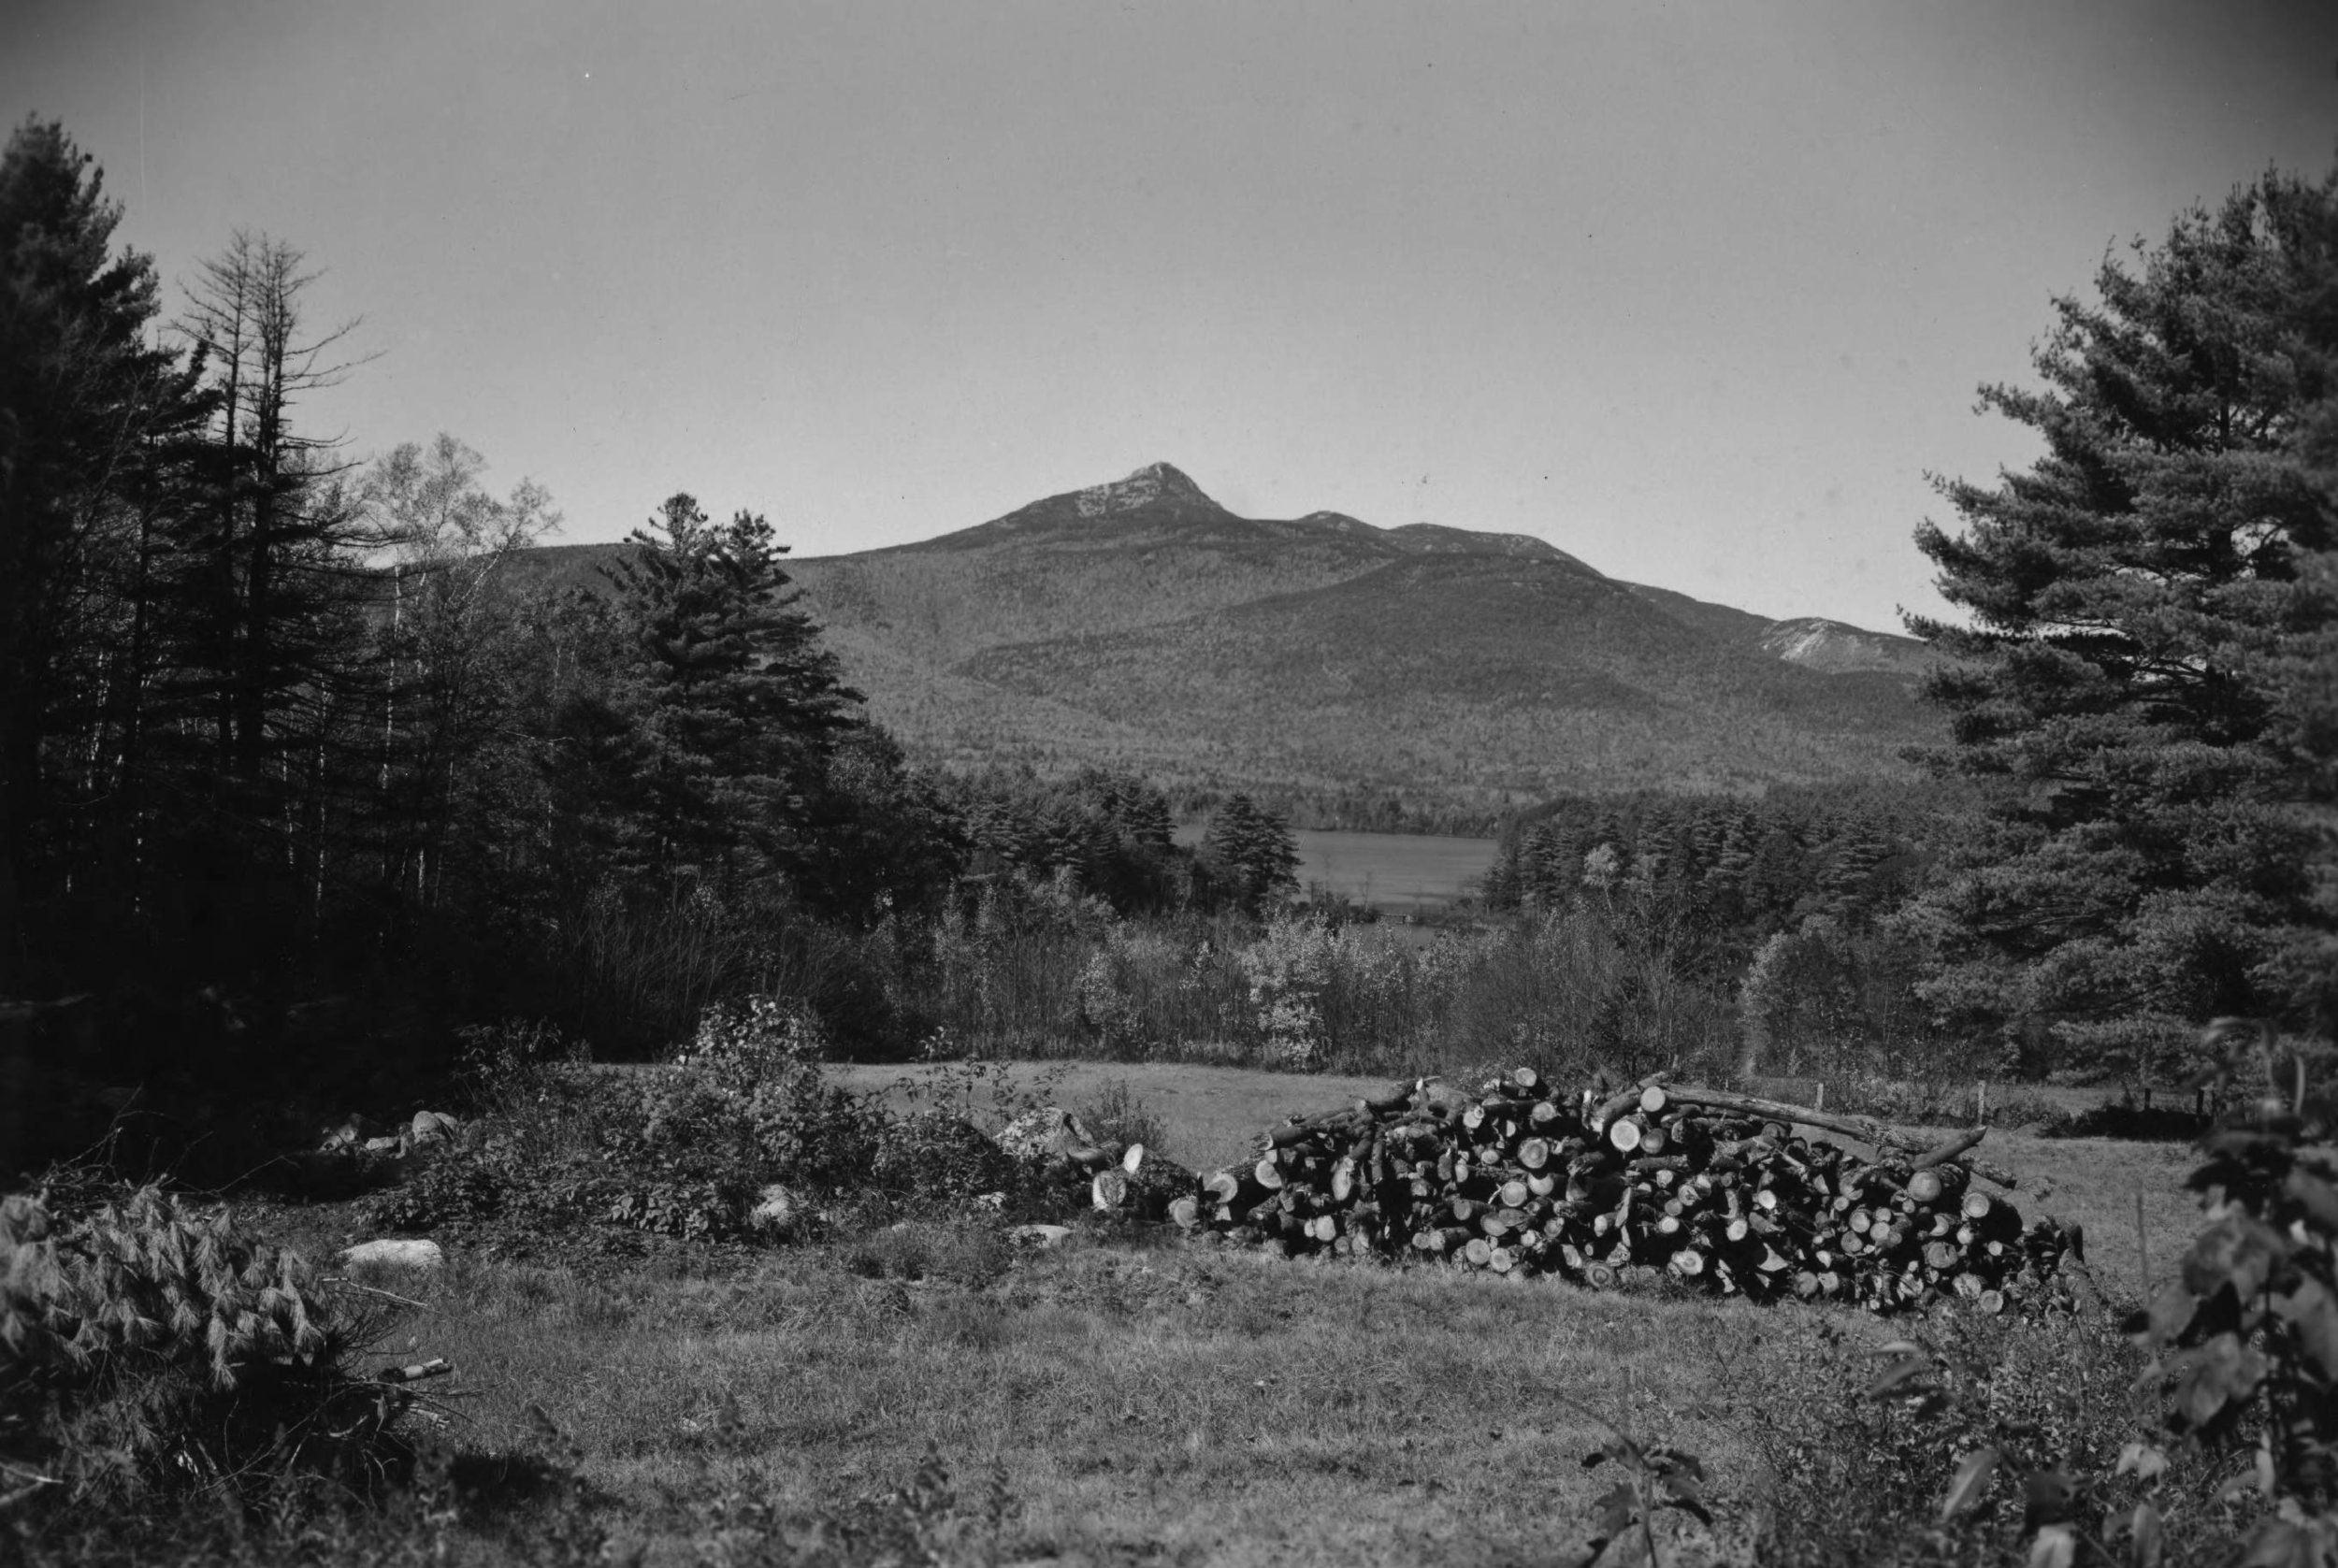 View from Basin View Lot, 1950